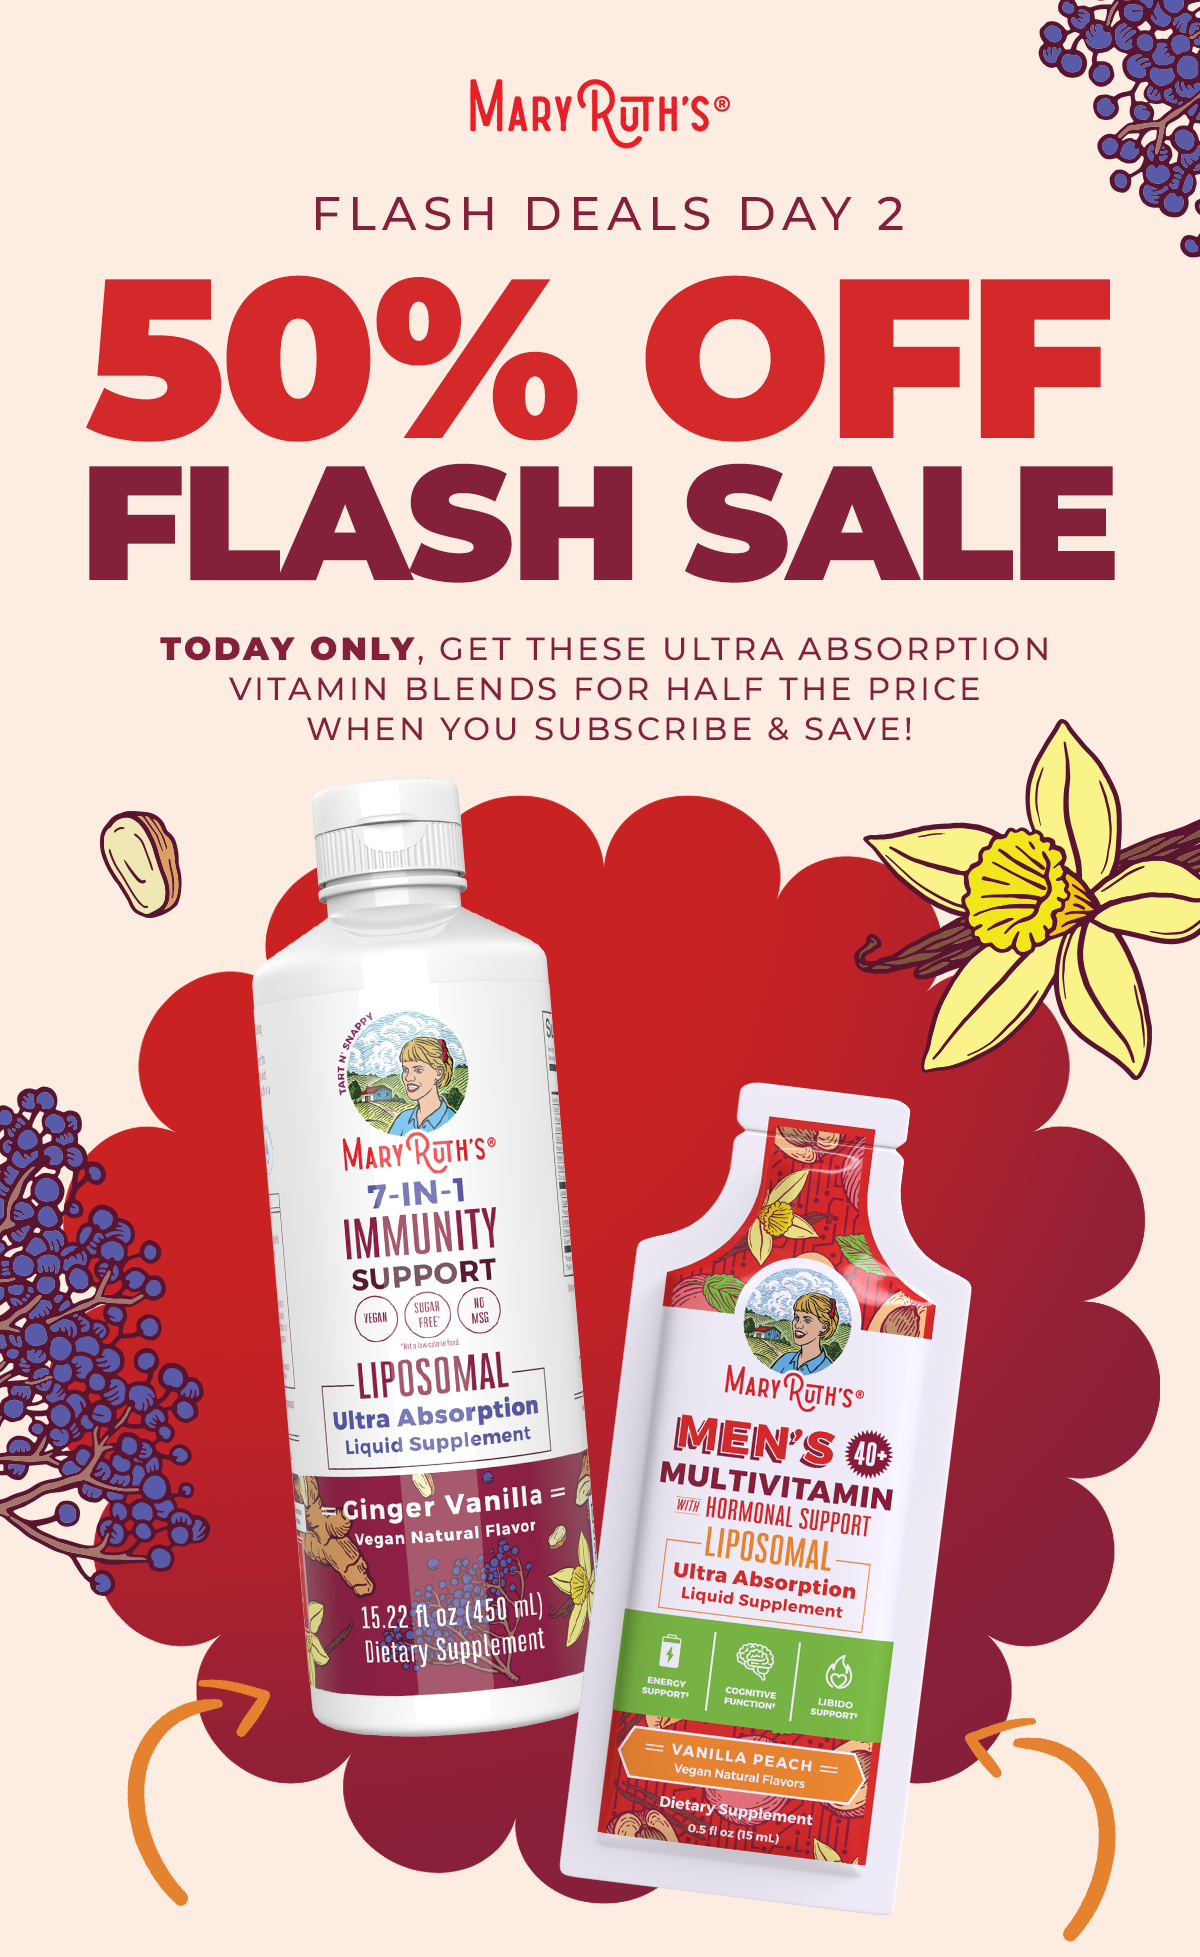 50% OFF FLASH SALE DAY 2